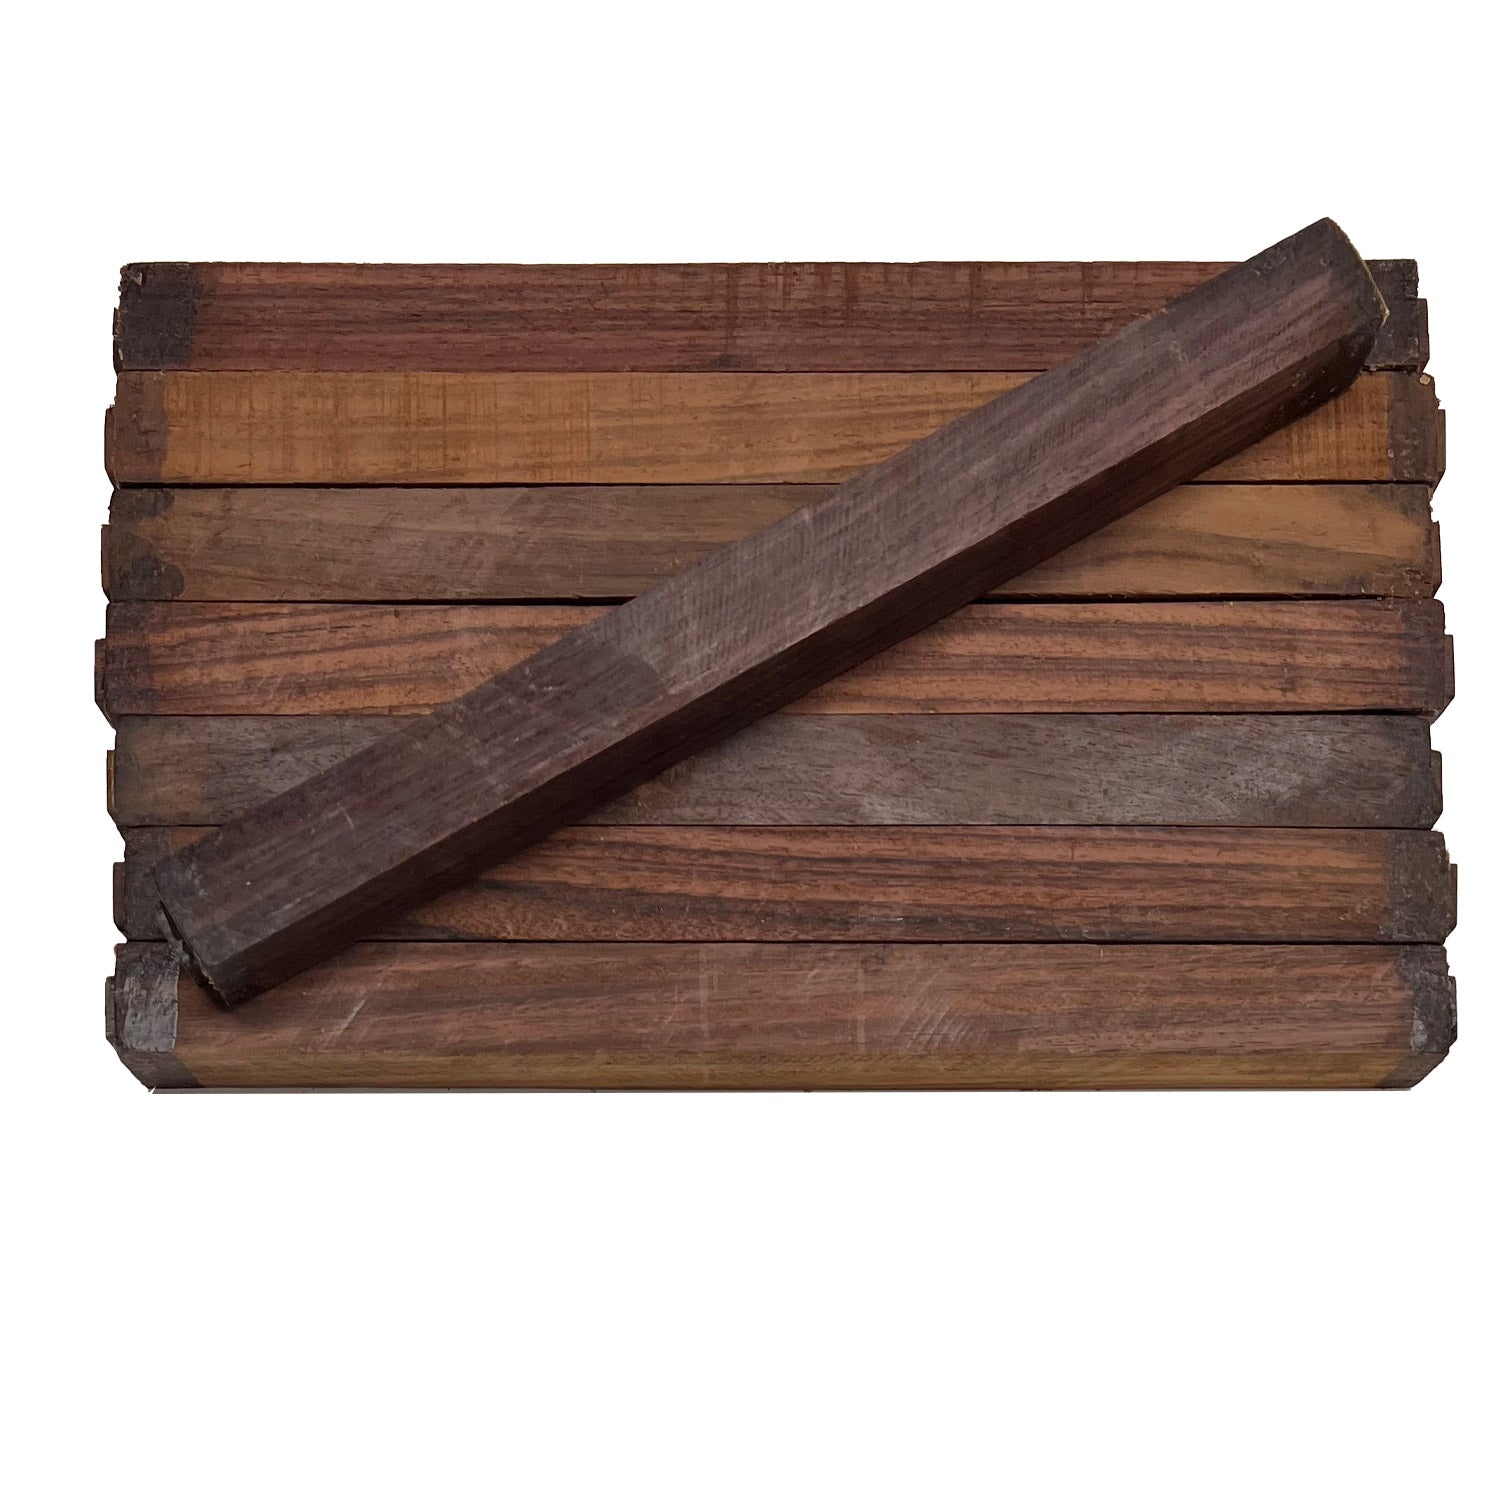 Pack of 8, Indian Rosewood Turning Blanks/Hobbywood Blanks 1” x 1” x 12” - Exotic Wood Zone - Buy online Across USA 